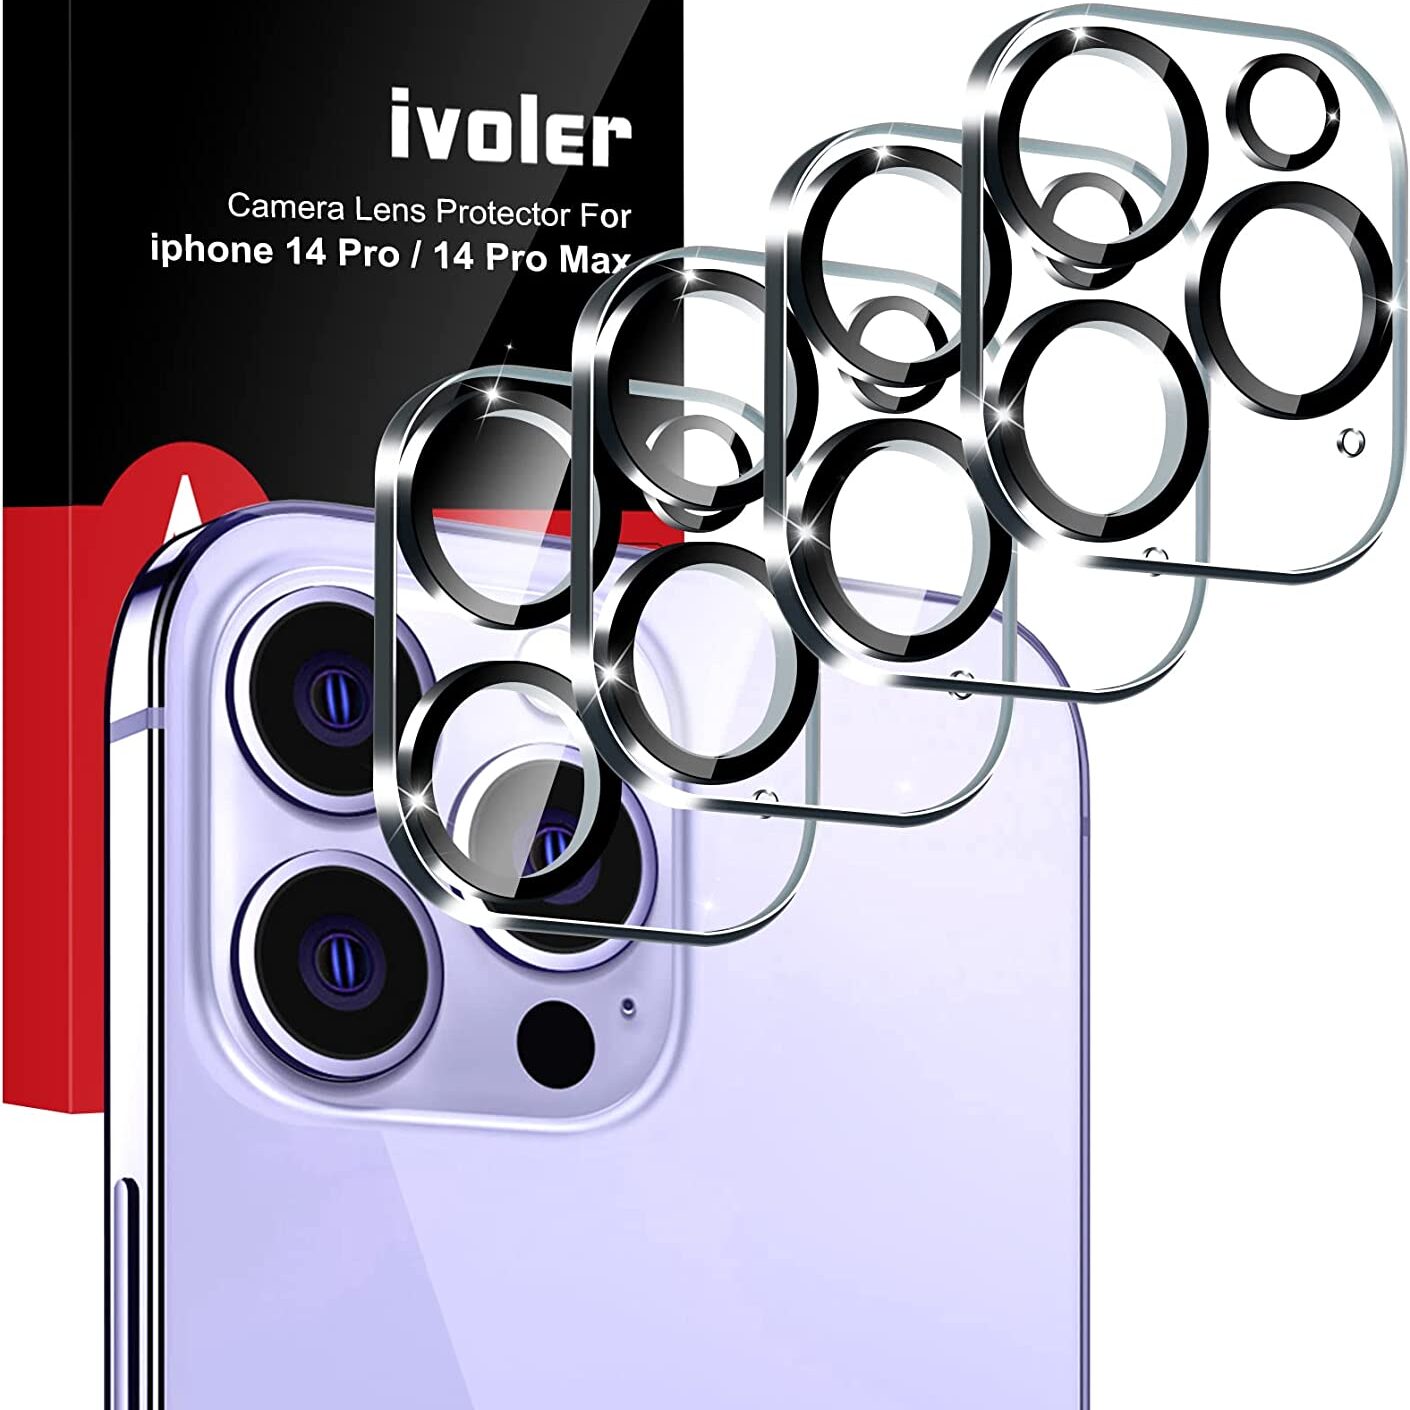 iVoler Camera Lens Protector for iPhone 14 Pro Max